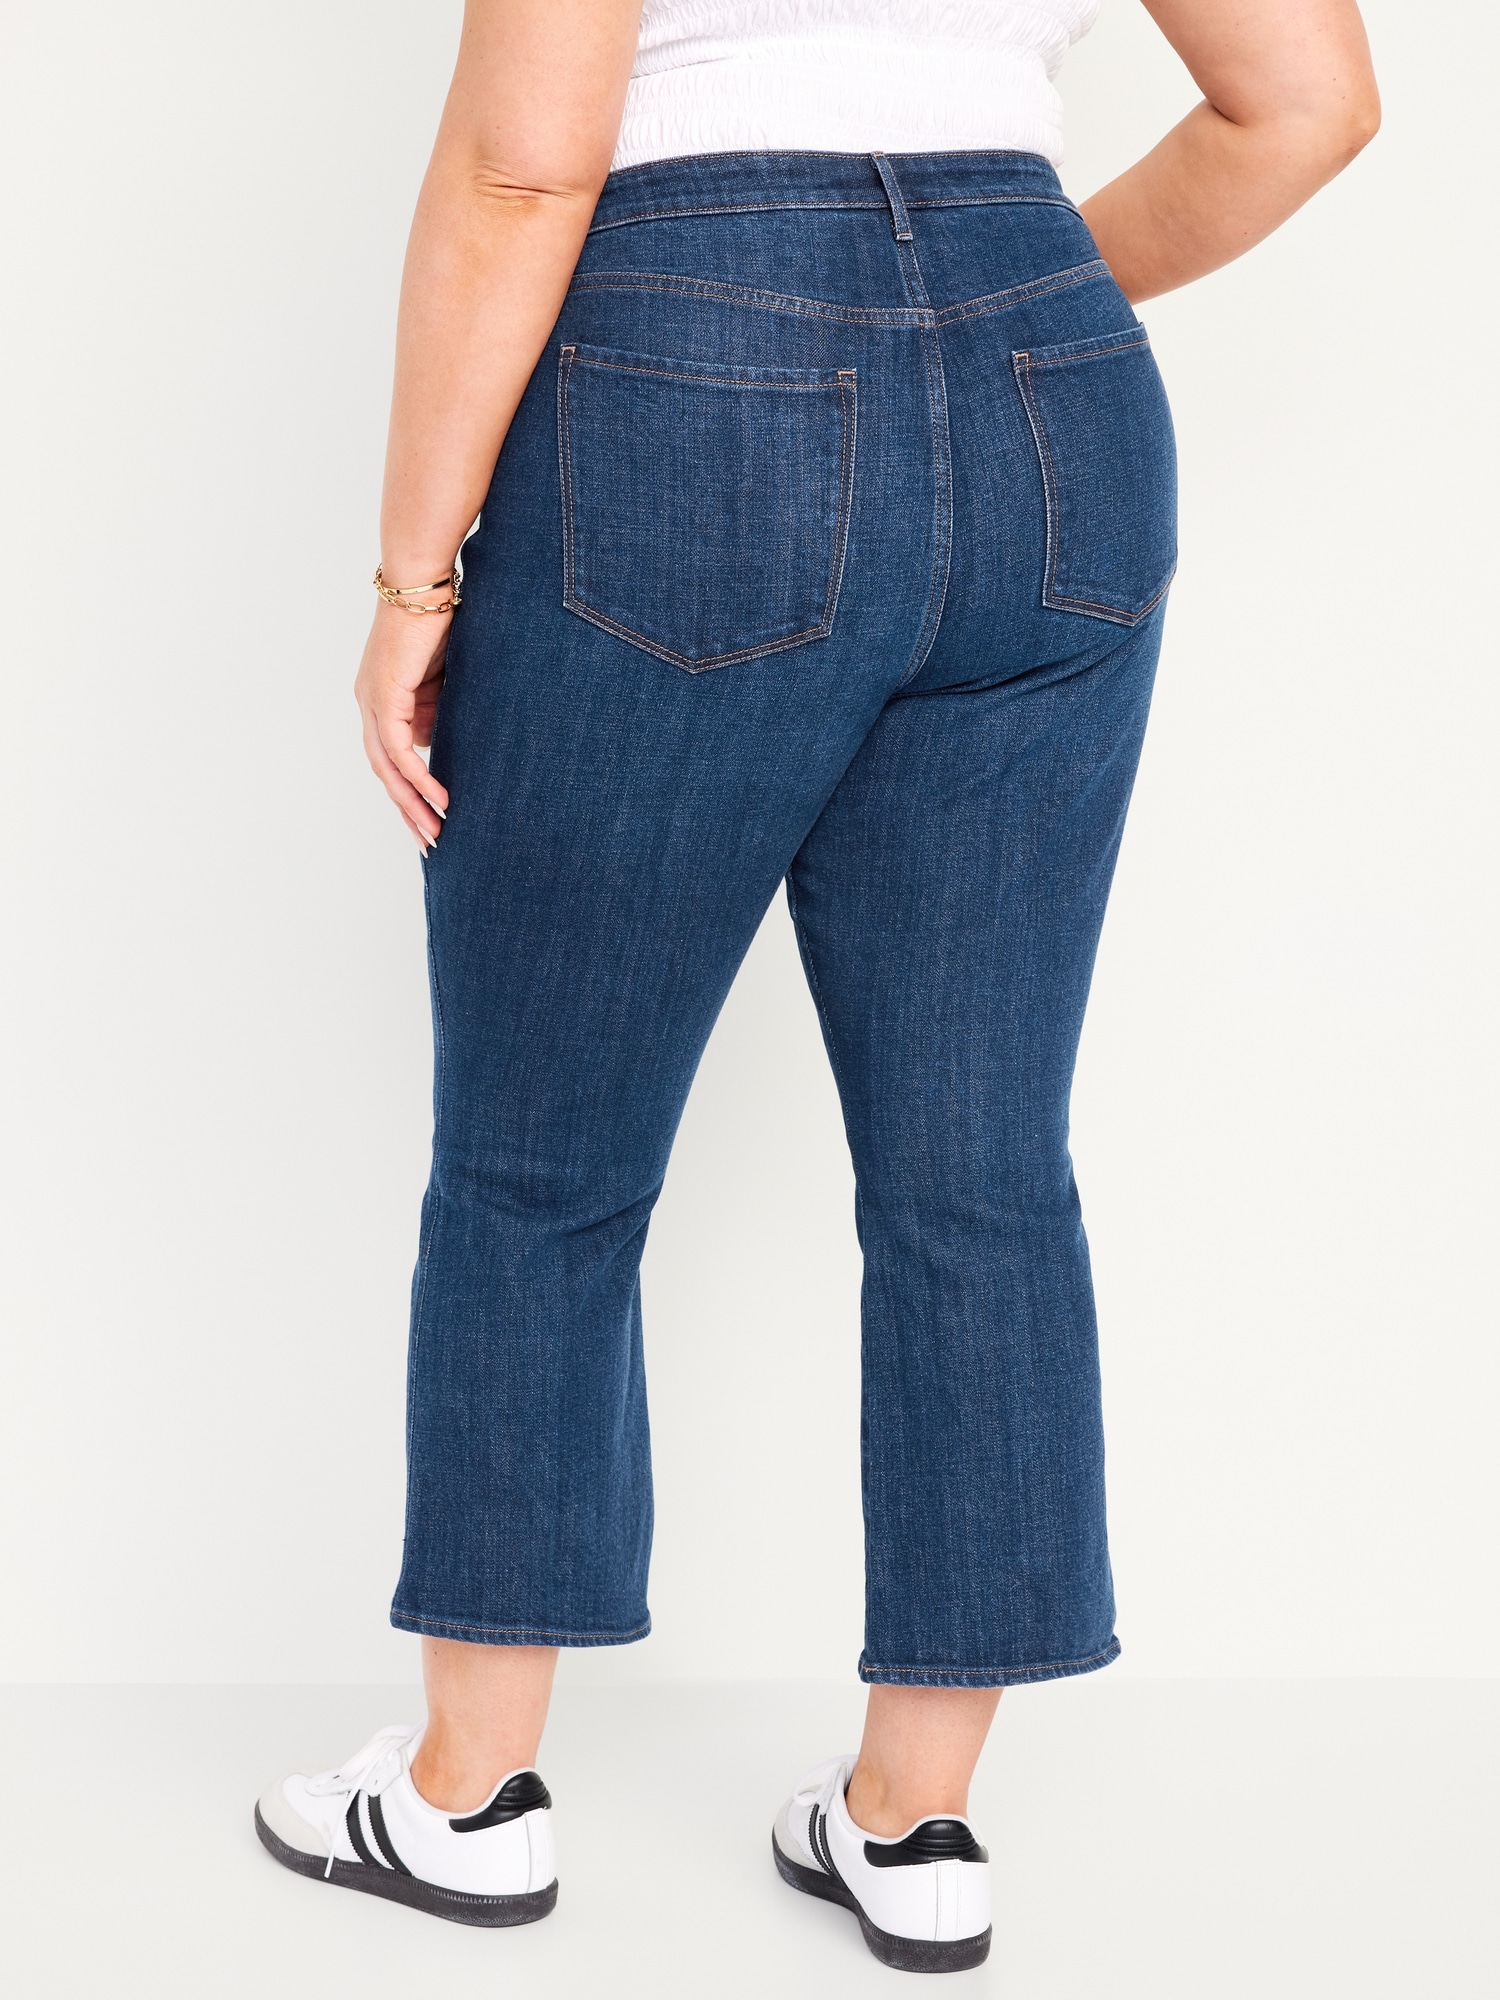 Happy Place 90's Crop Flare Jeans - Camel - Restock! – Ivy & Olive Boutique